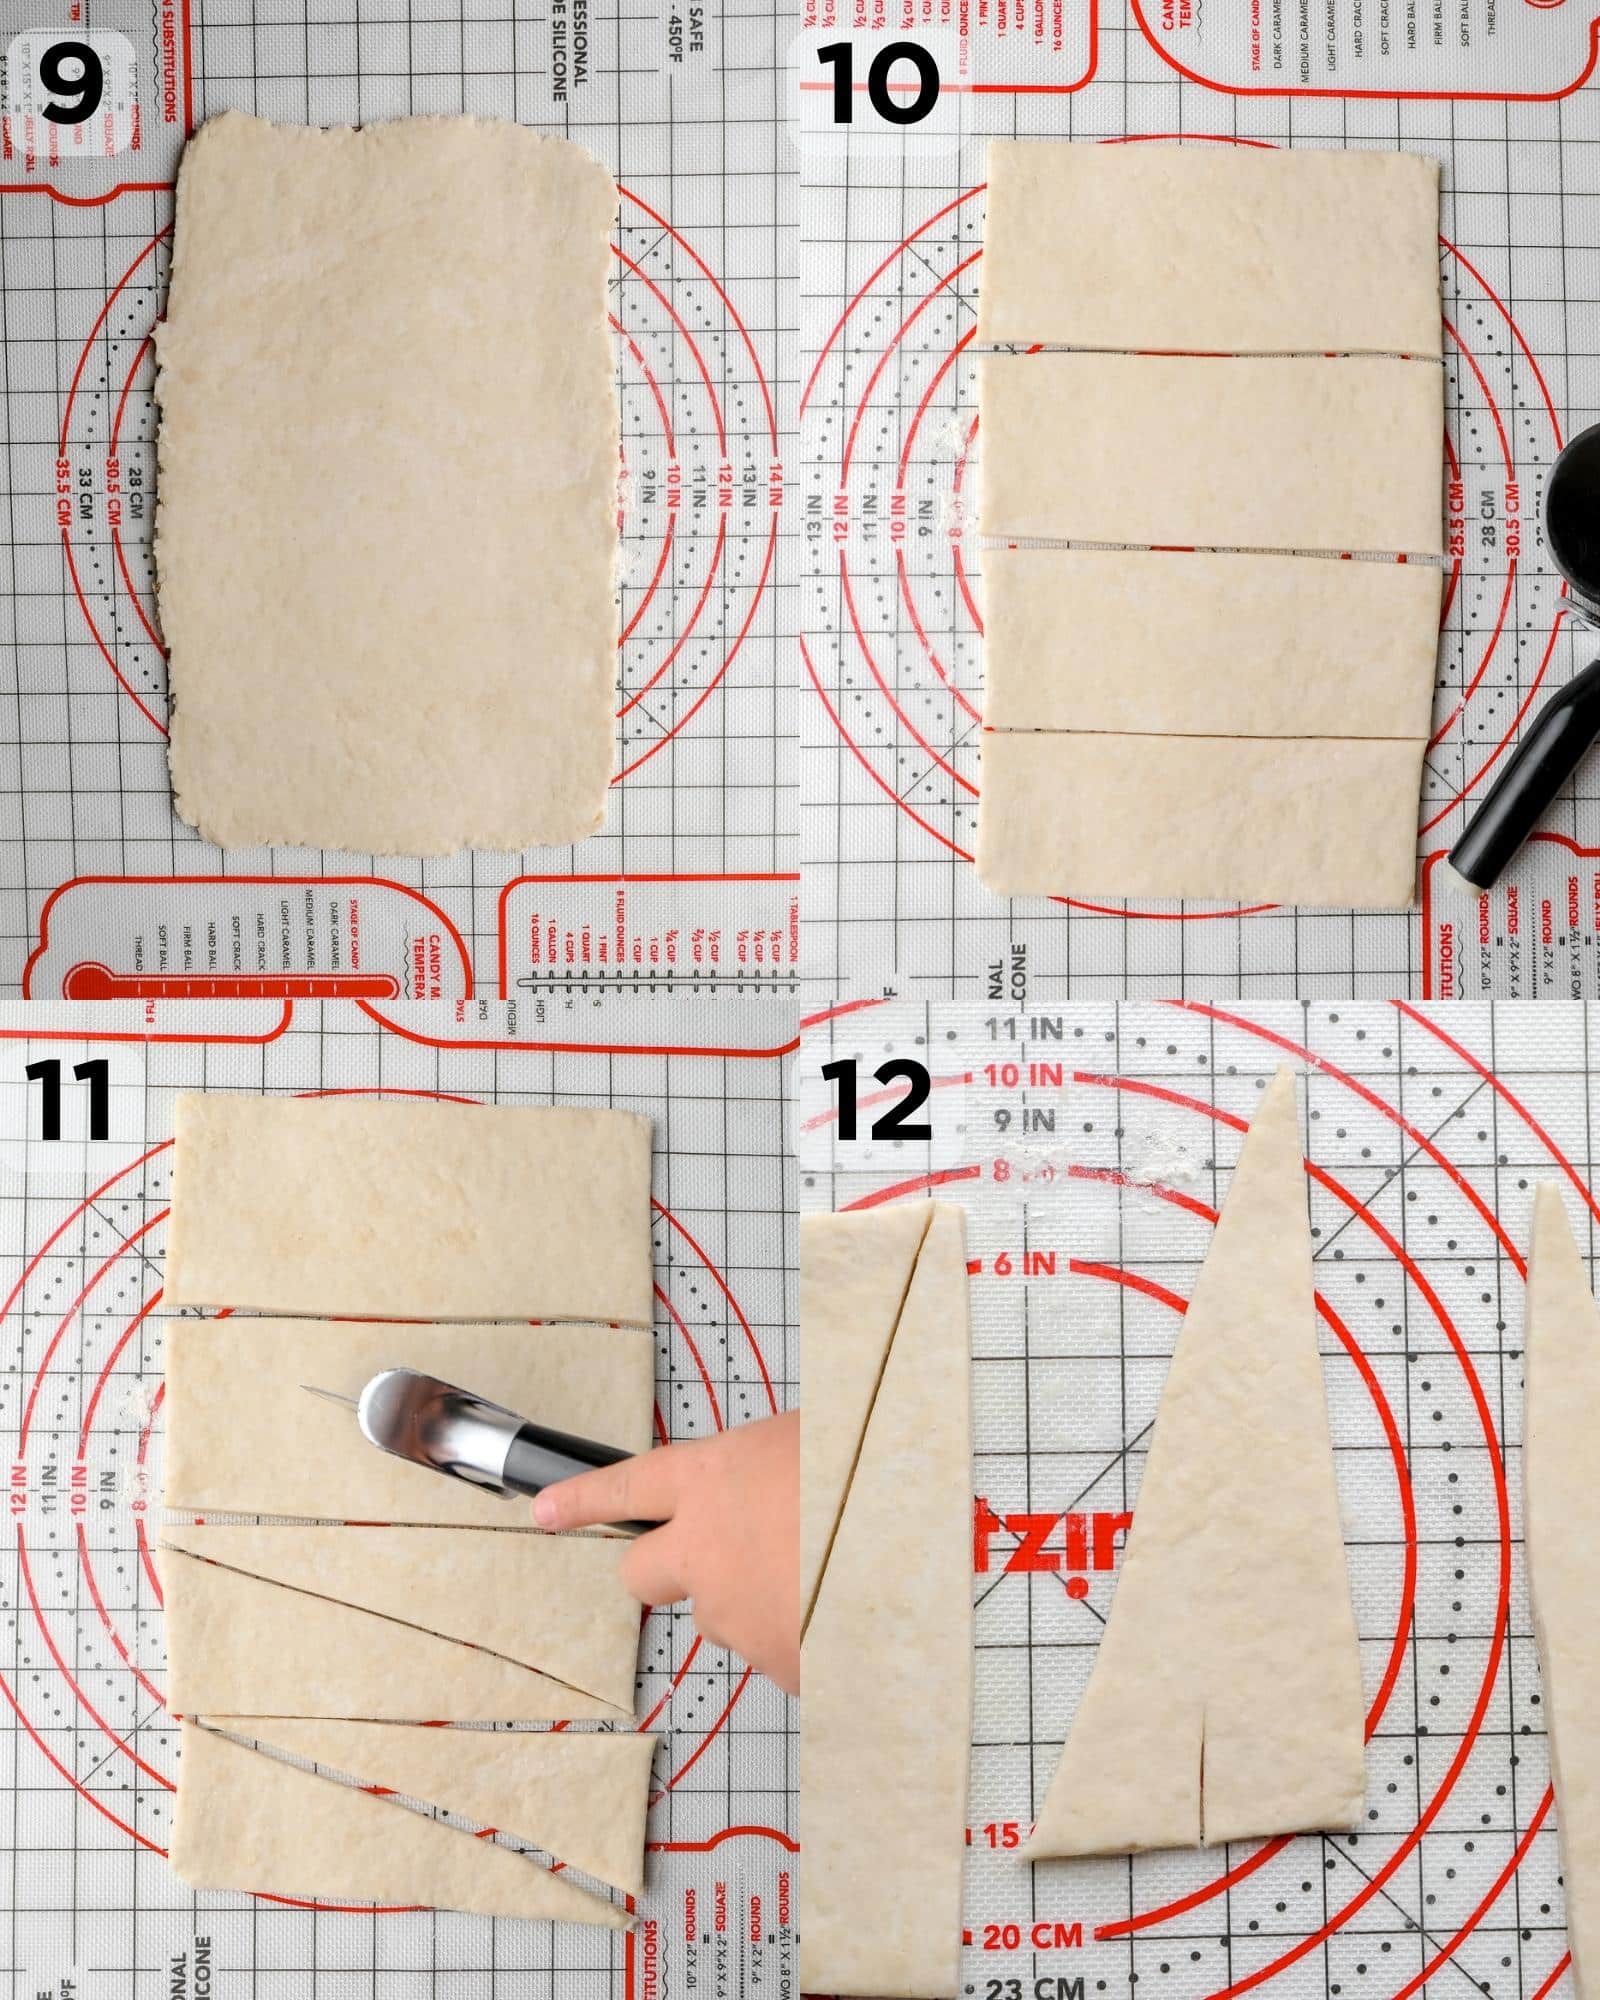 4 images showing the steps to cutting triangles out of croissant dough.